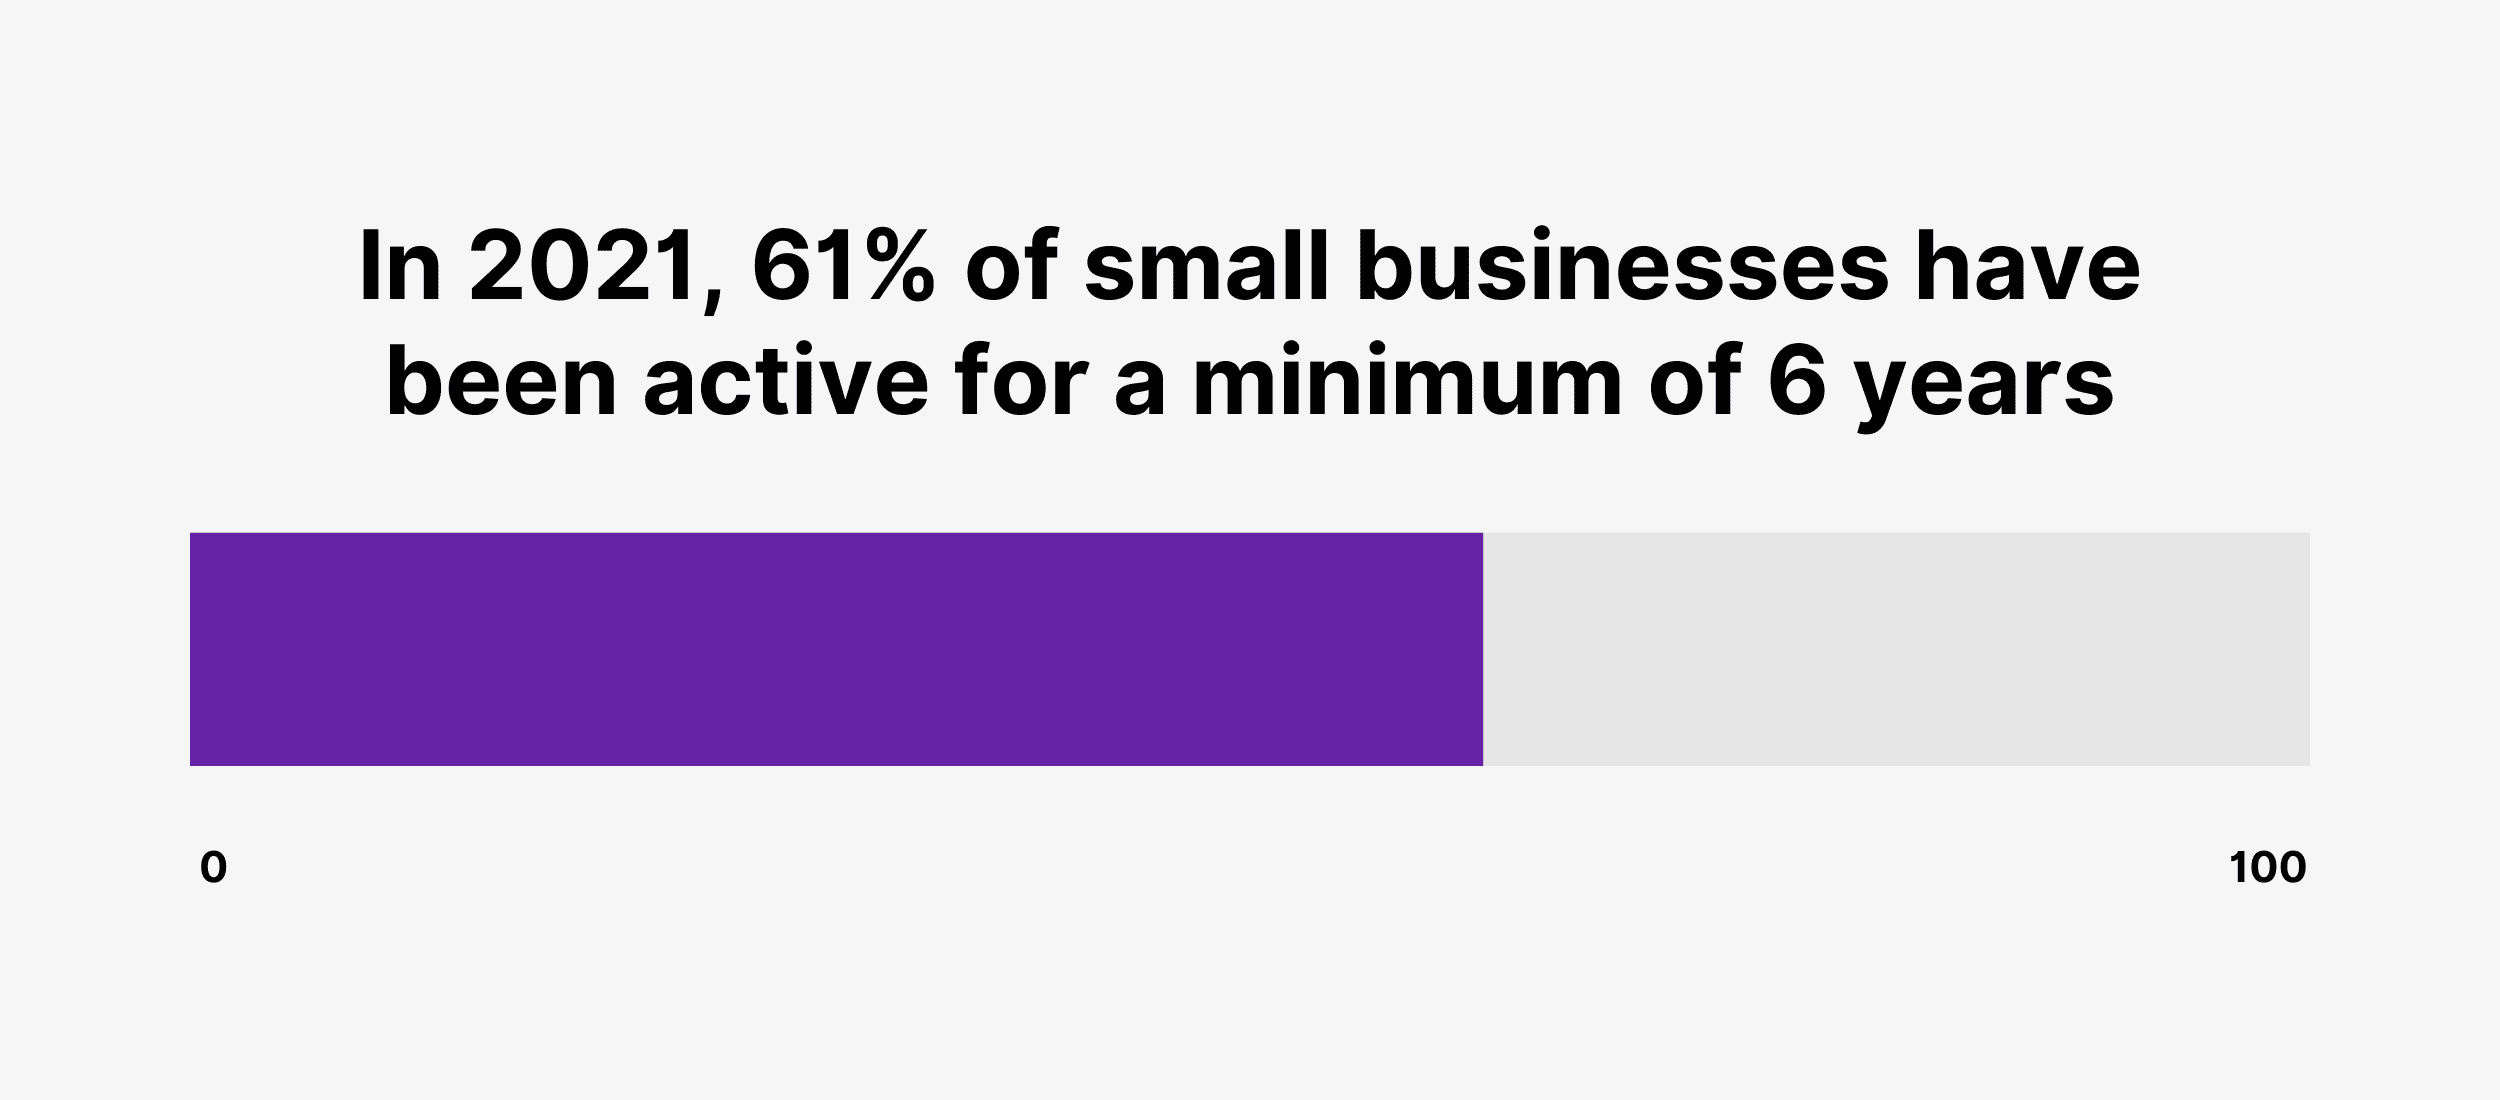 In 2021, 61% of small businesses have been active for a minimum of 6 years